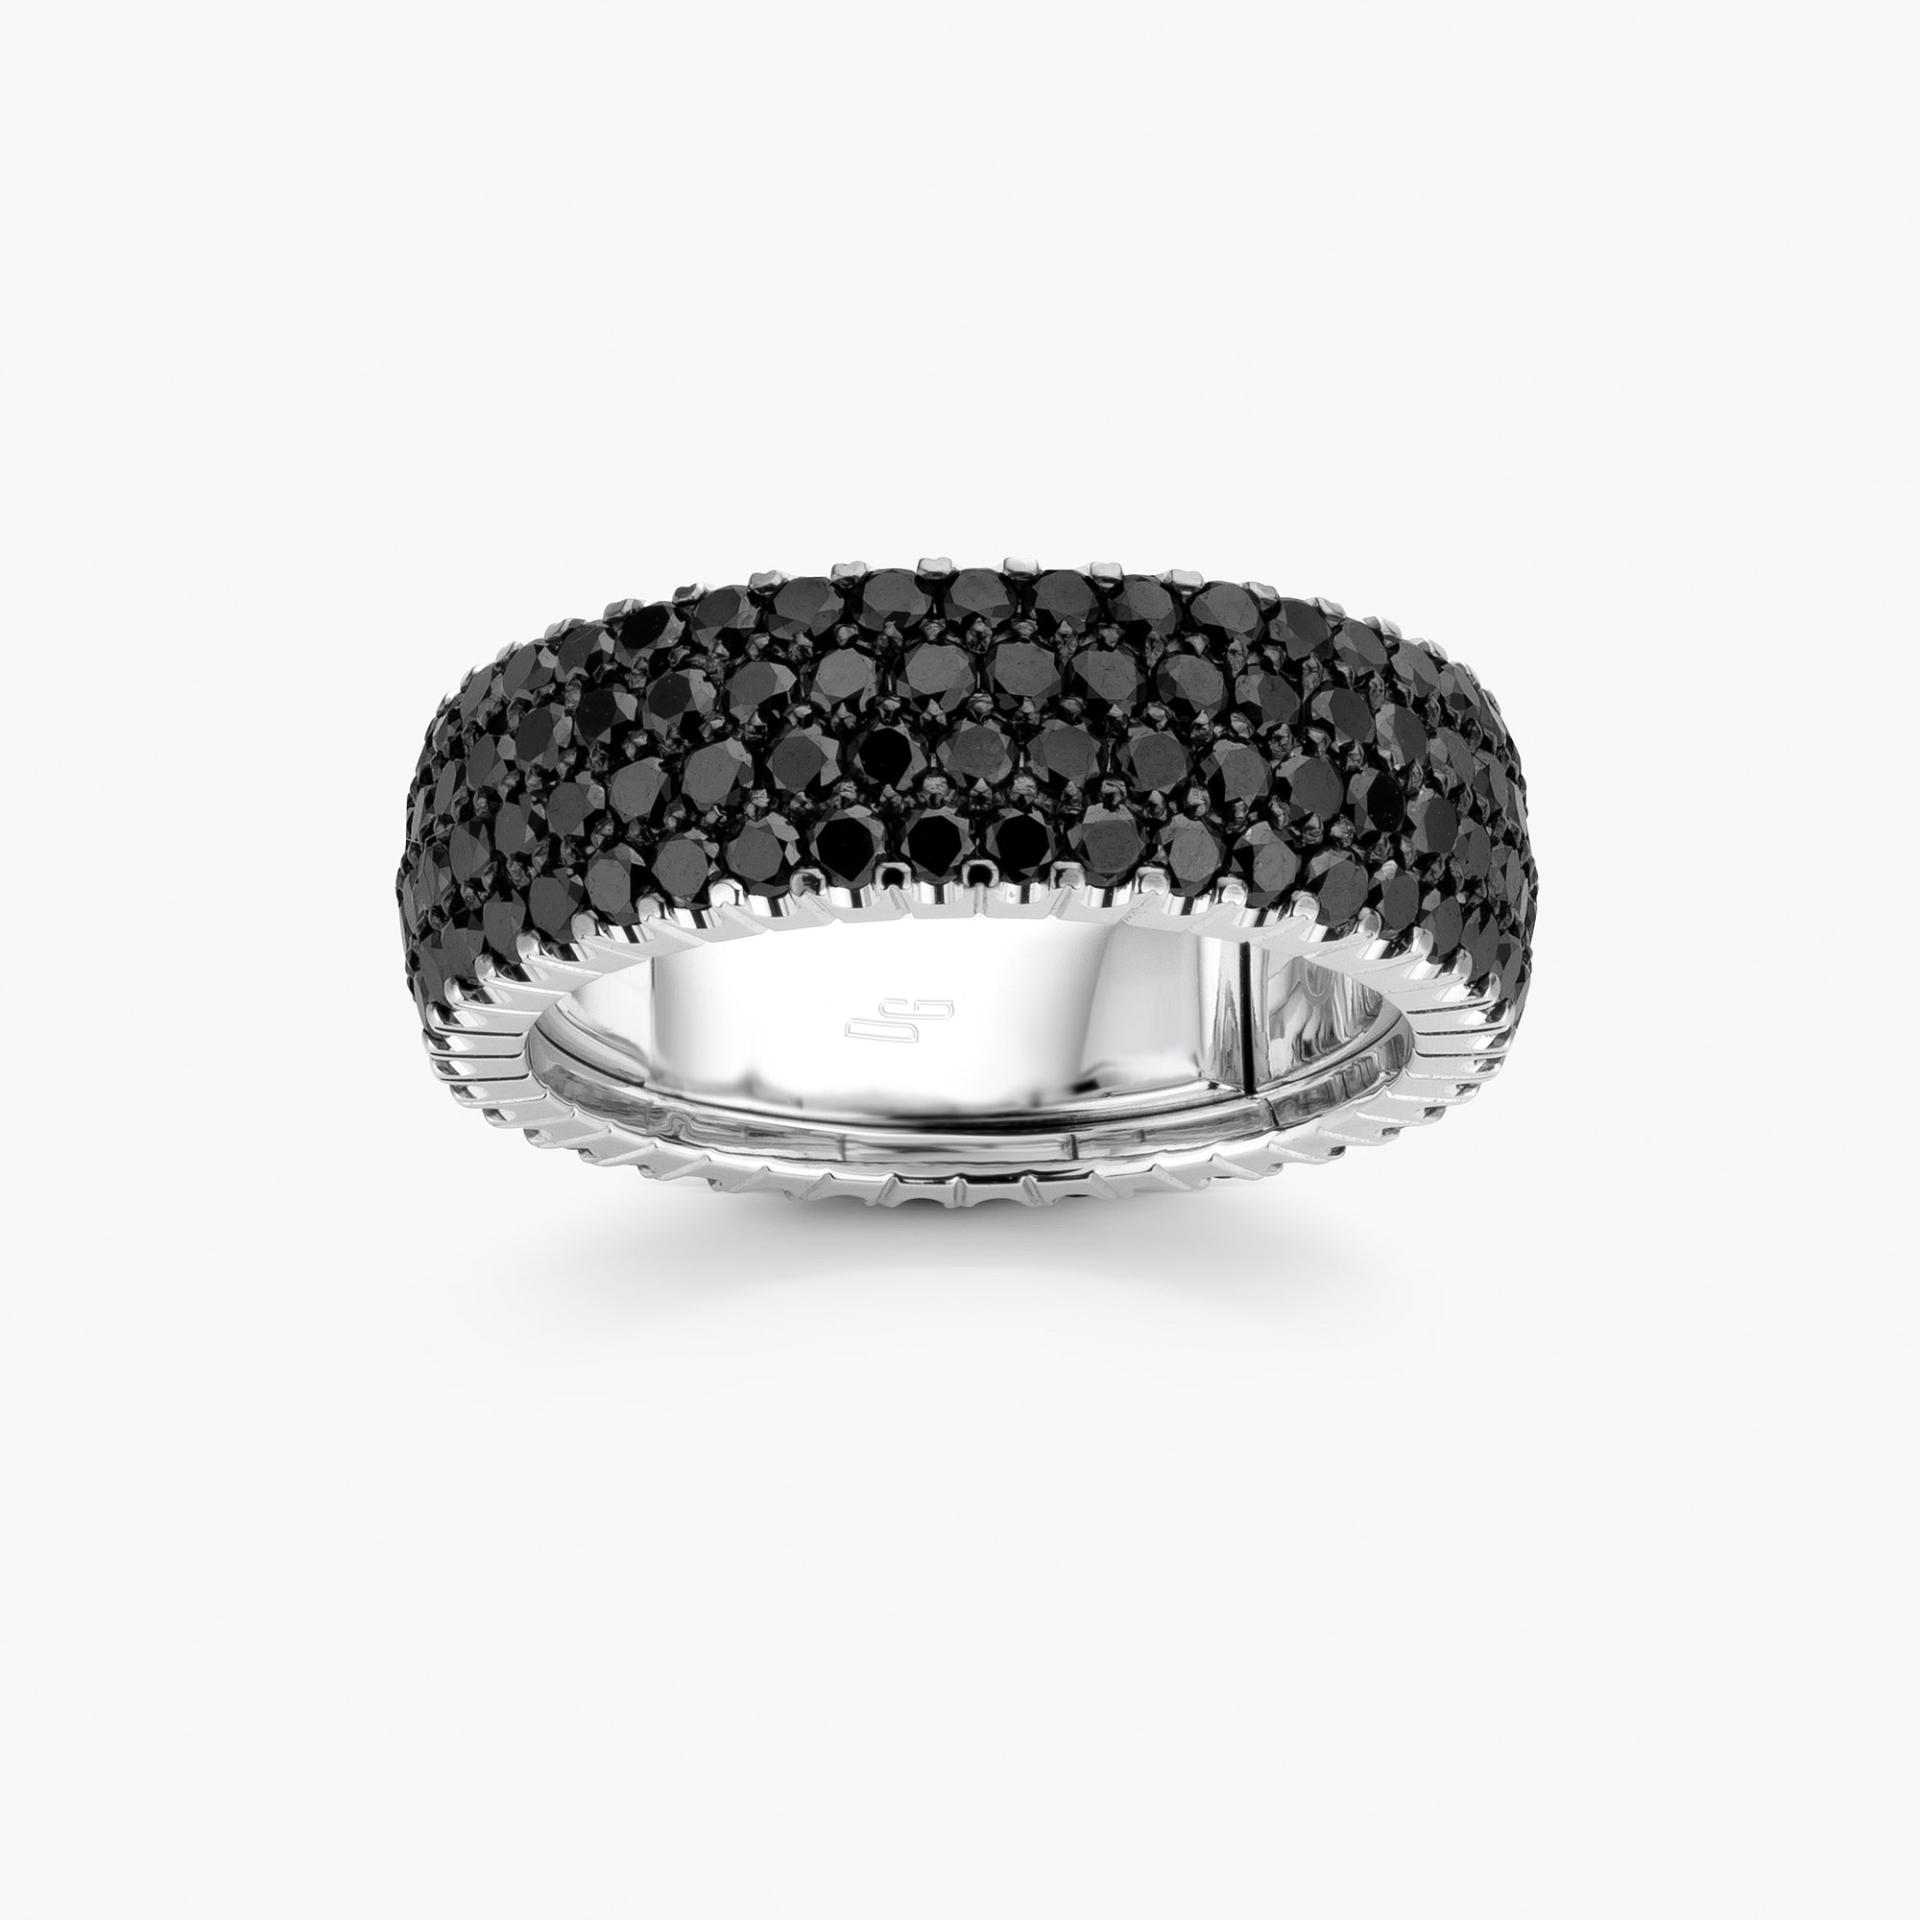 White gold ring Extensible set with black diamonds made by Roberto Demeglio